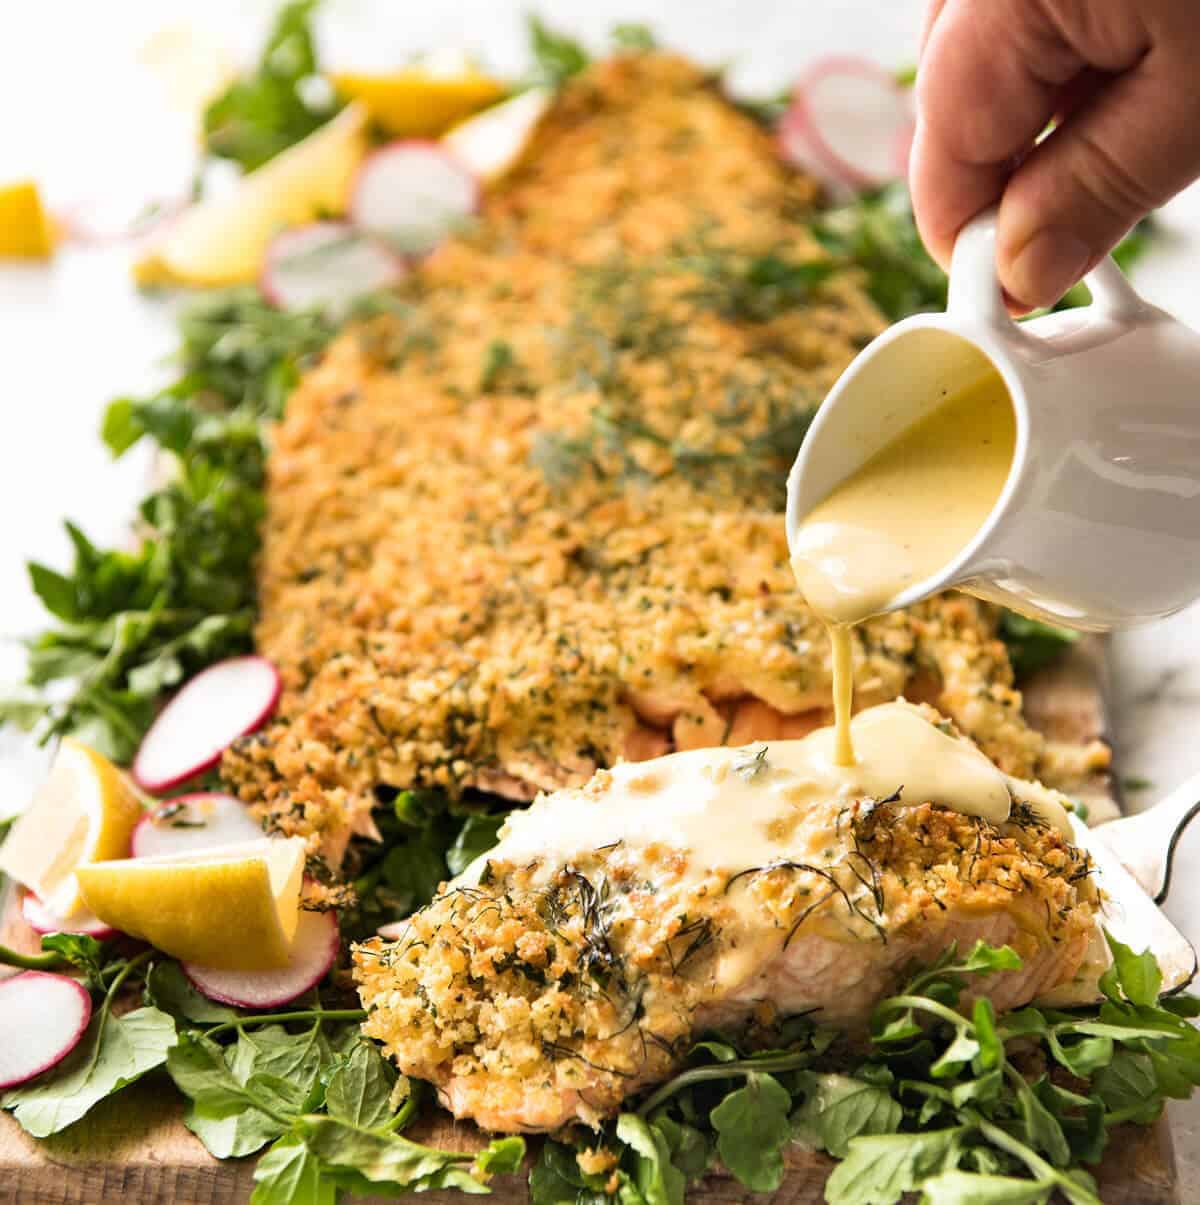 Parmesan-Crusted Extravaganza: Baked Parmesan Crusted Salmon With Lemon ...